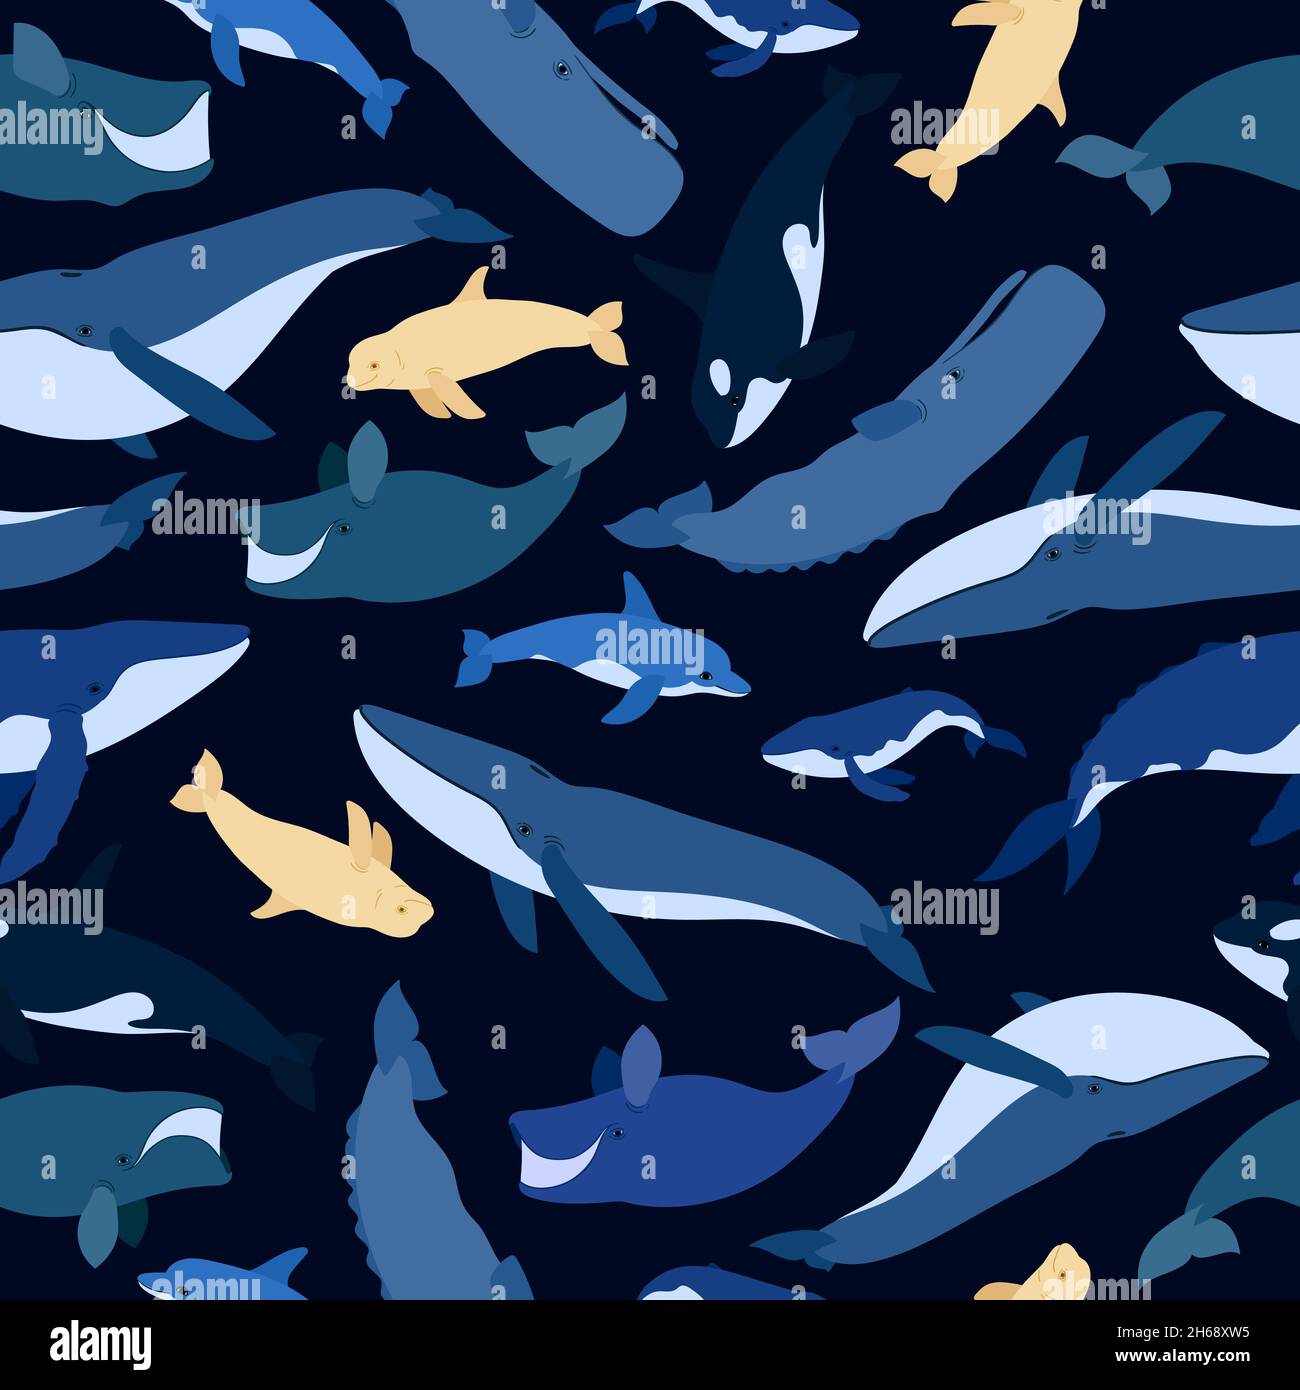 Seamless pattern of whales. Beluga, killer whale, humpback whale, cachalot, blue whale, dolphin, bowhead, southern right whale, sperm hale. Underwater world, Marine. Vector illustration of a whales. Stock Vector